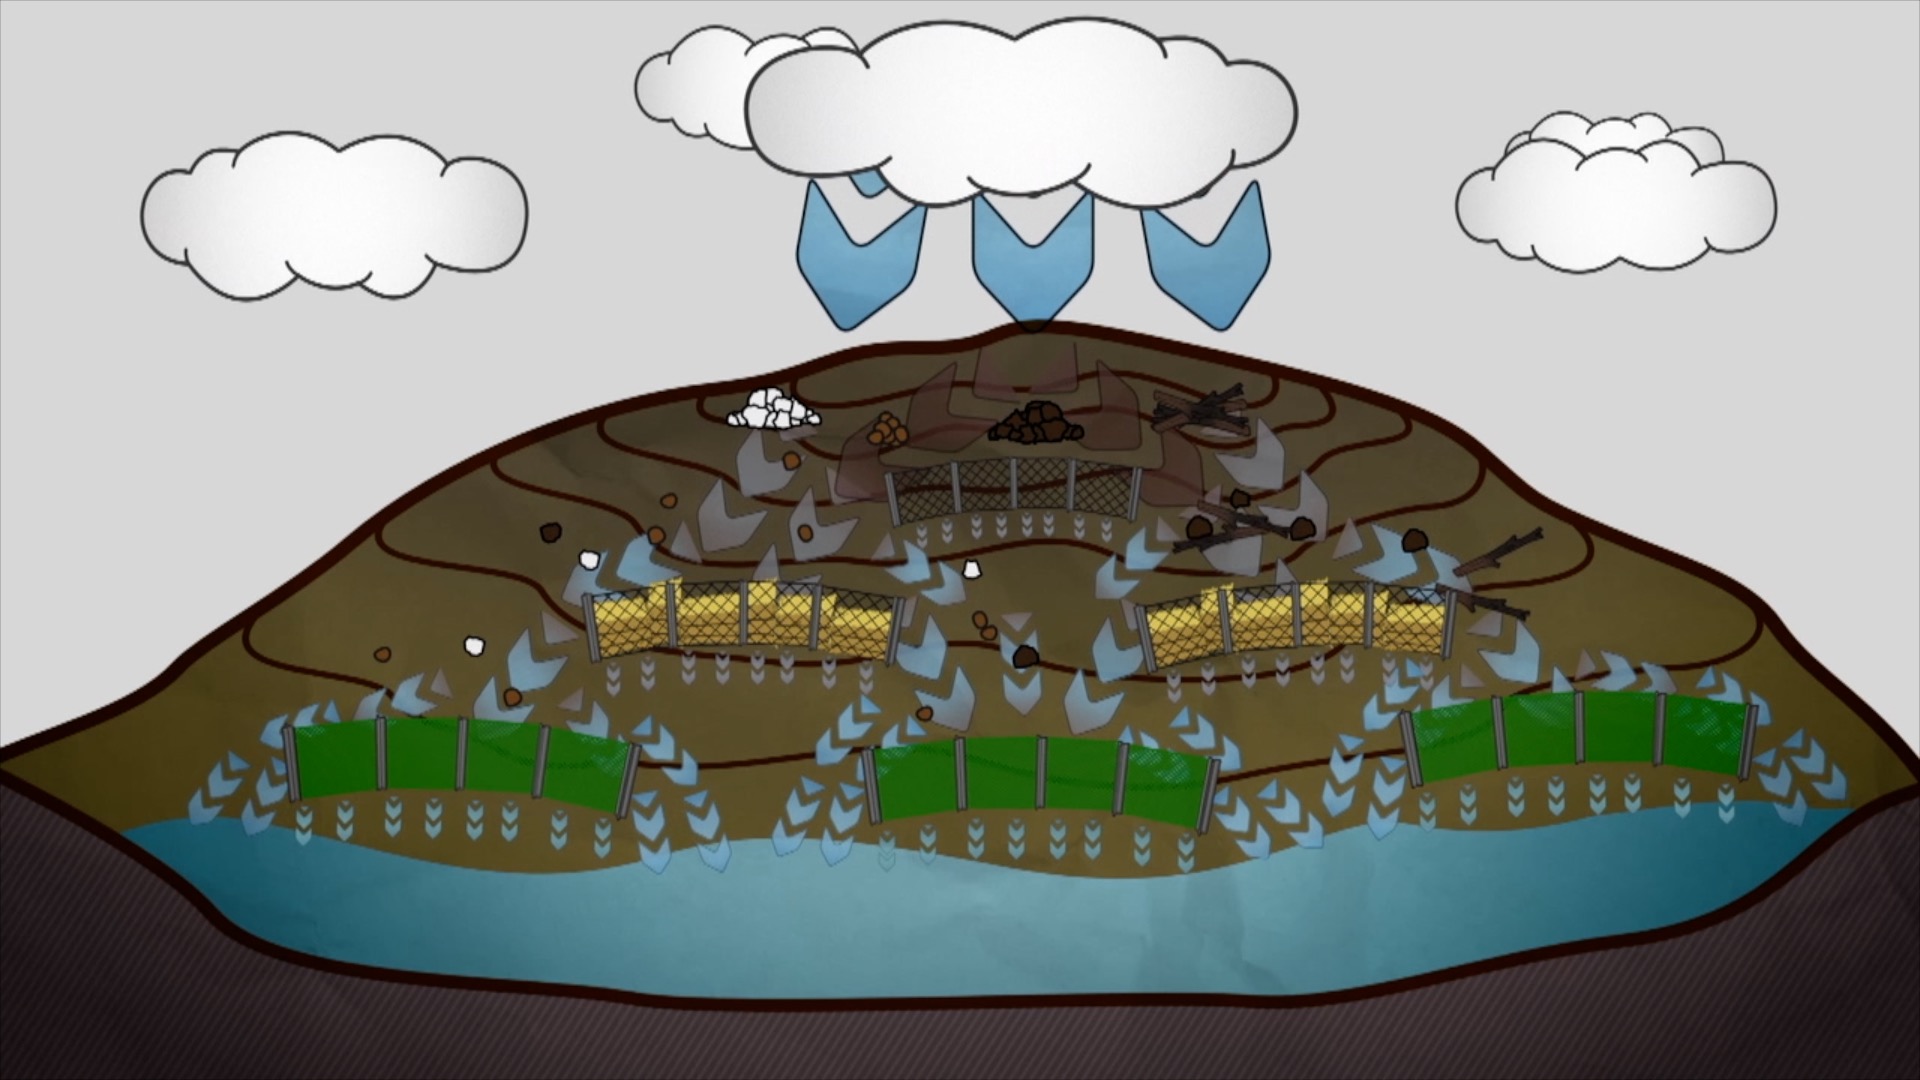 Diagram of hill showing how rainwater runoff will flow downhill and how sediment fences can redirect it before water reaches a catchment at base. 